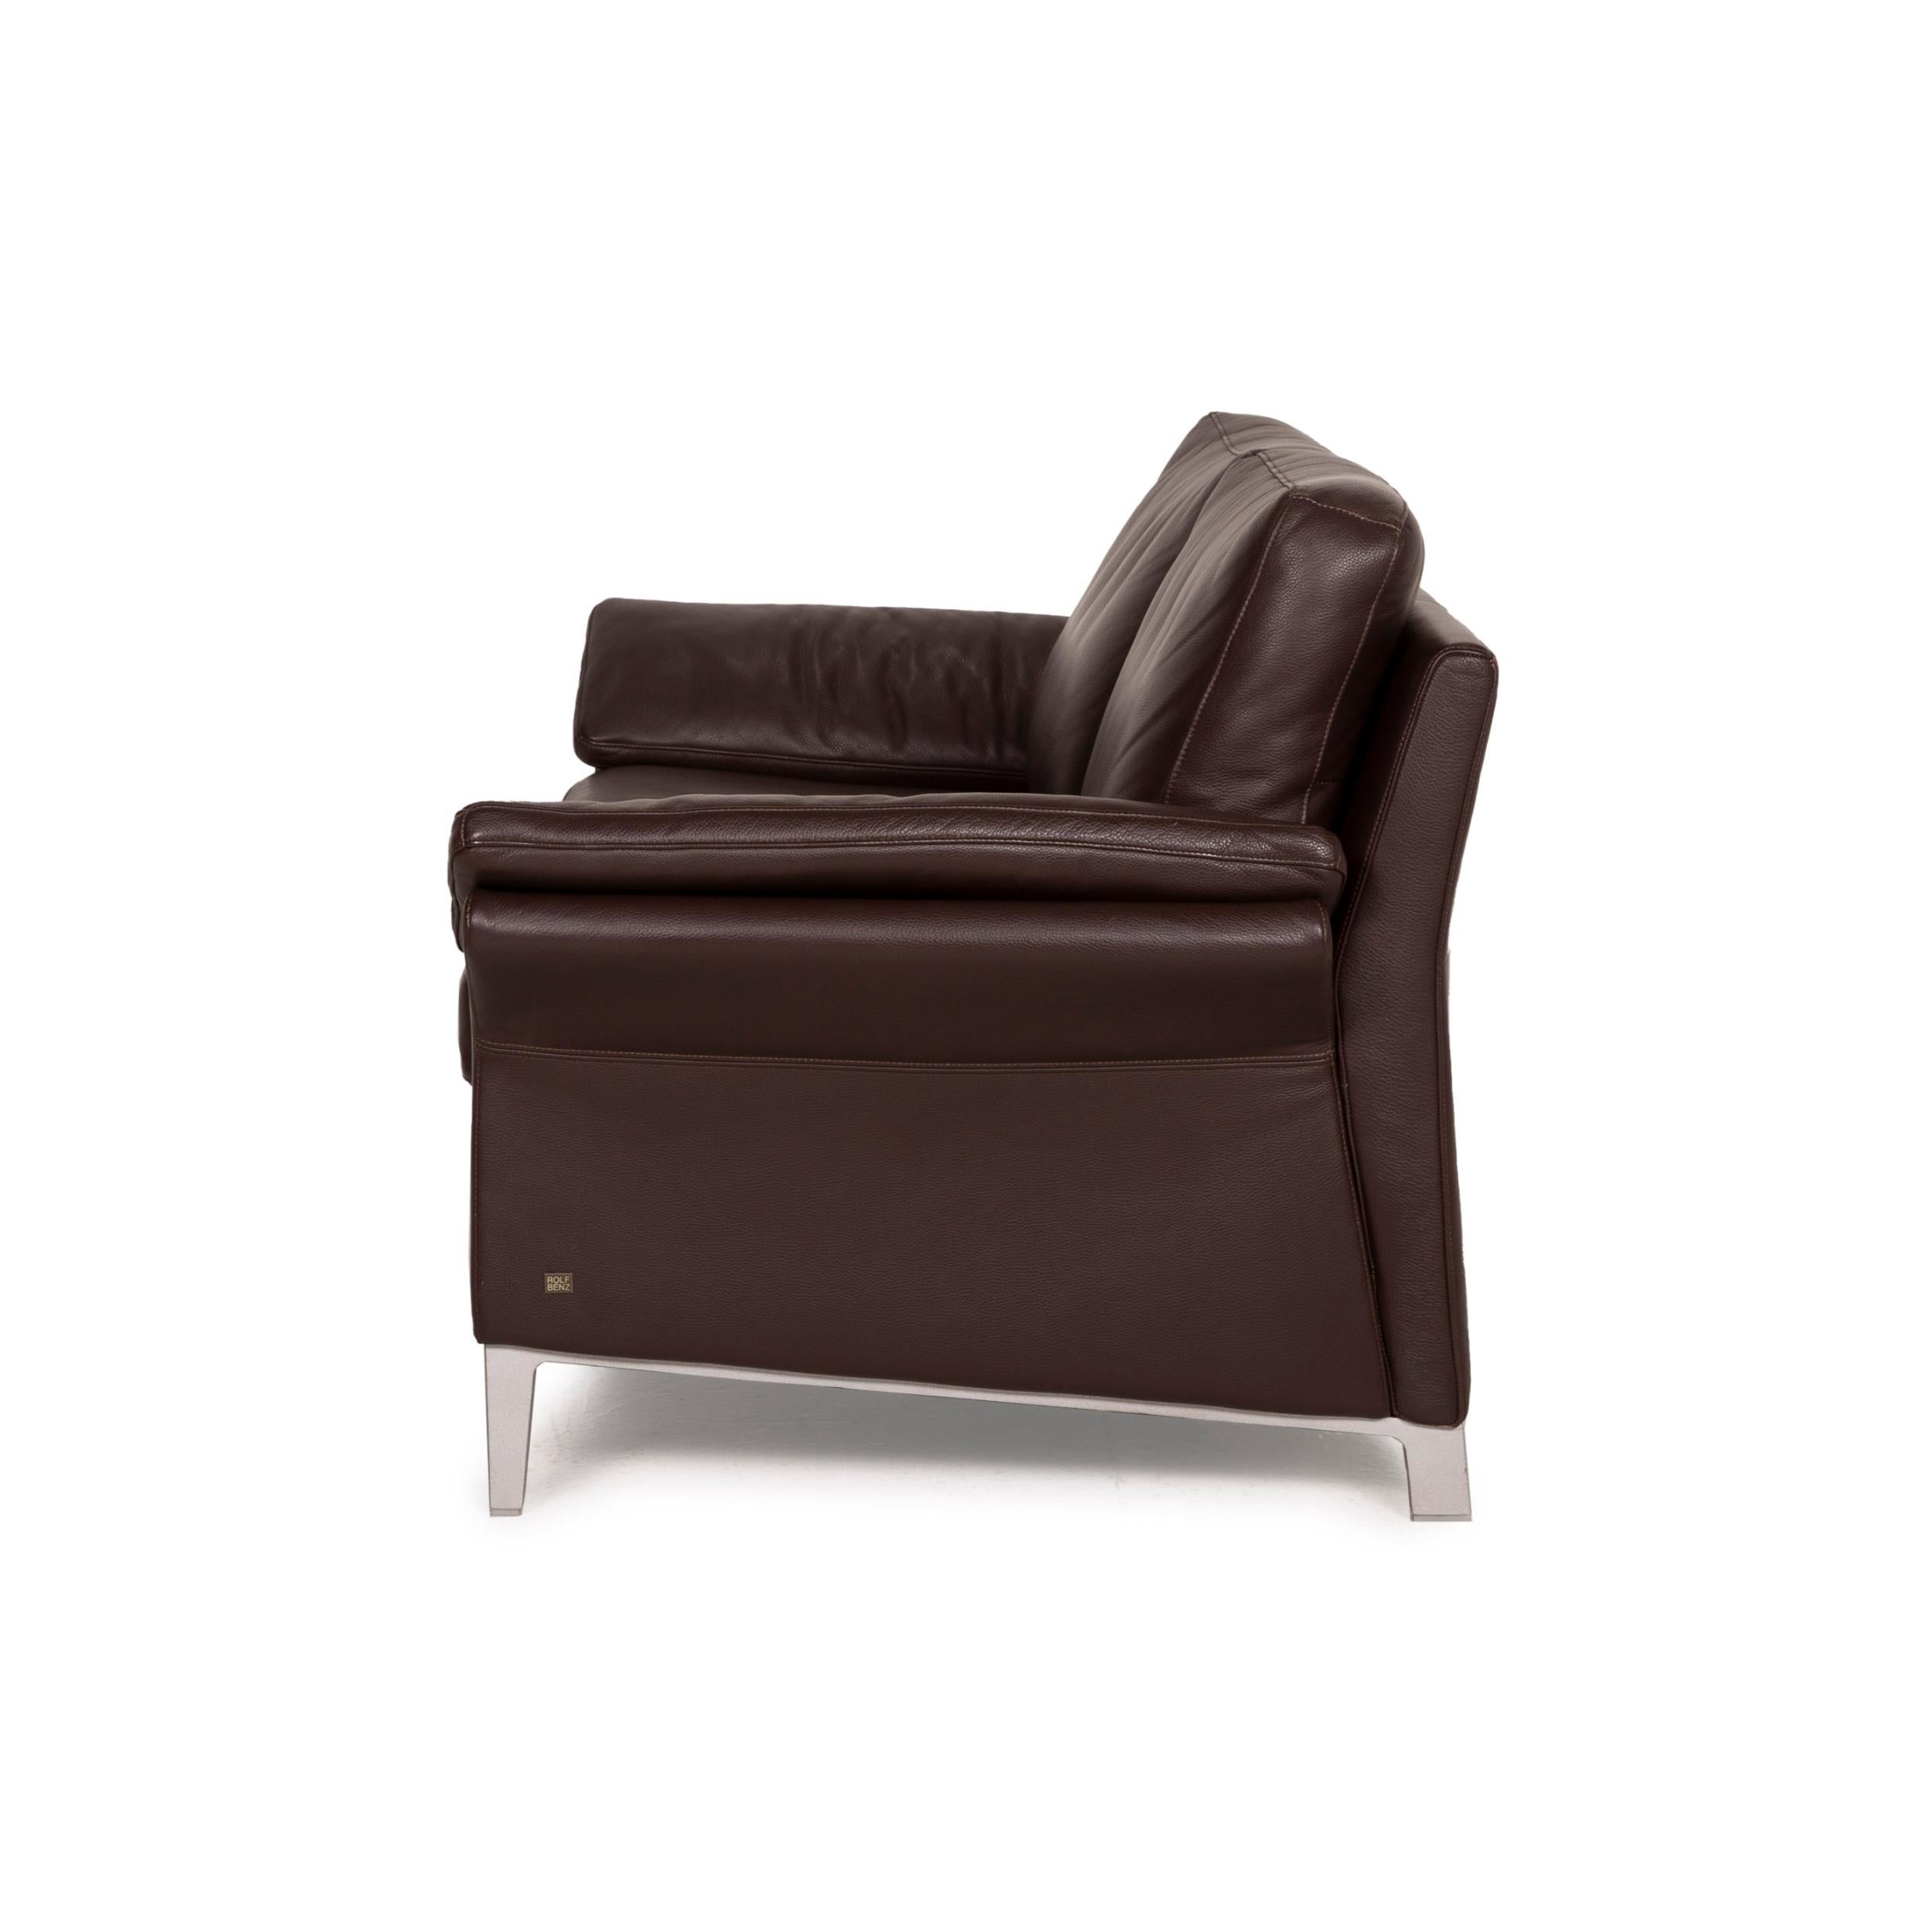 Rolf Benz 3300 Leather Sofa Brown Two-Seater 5